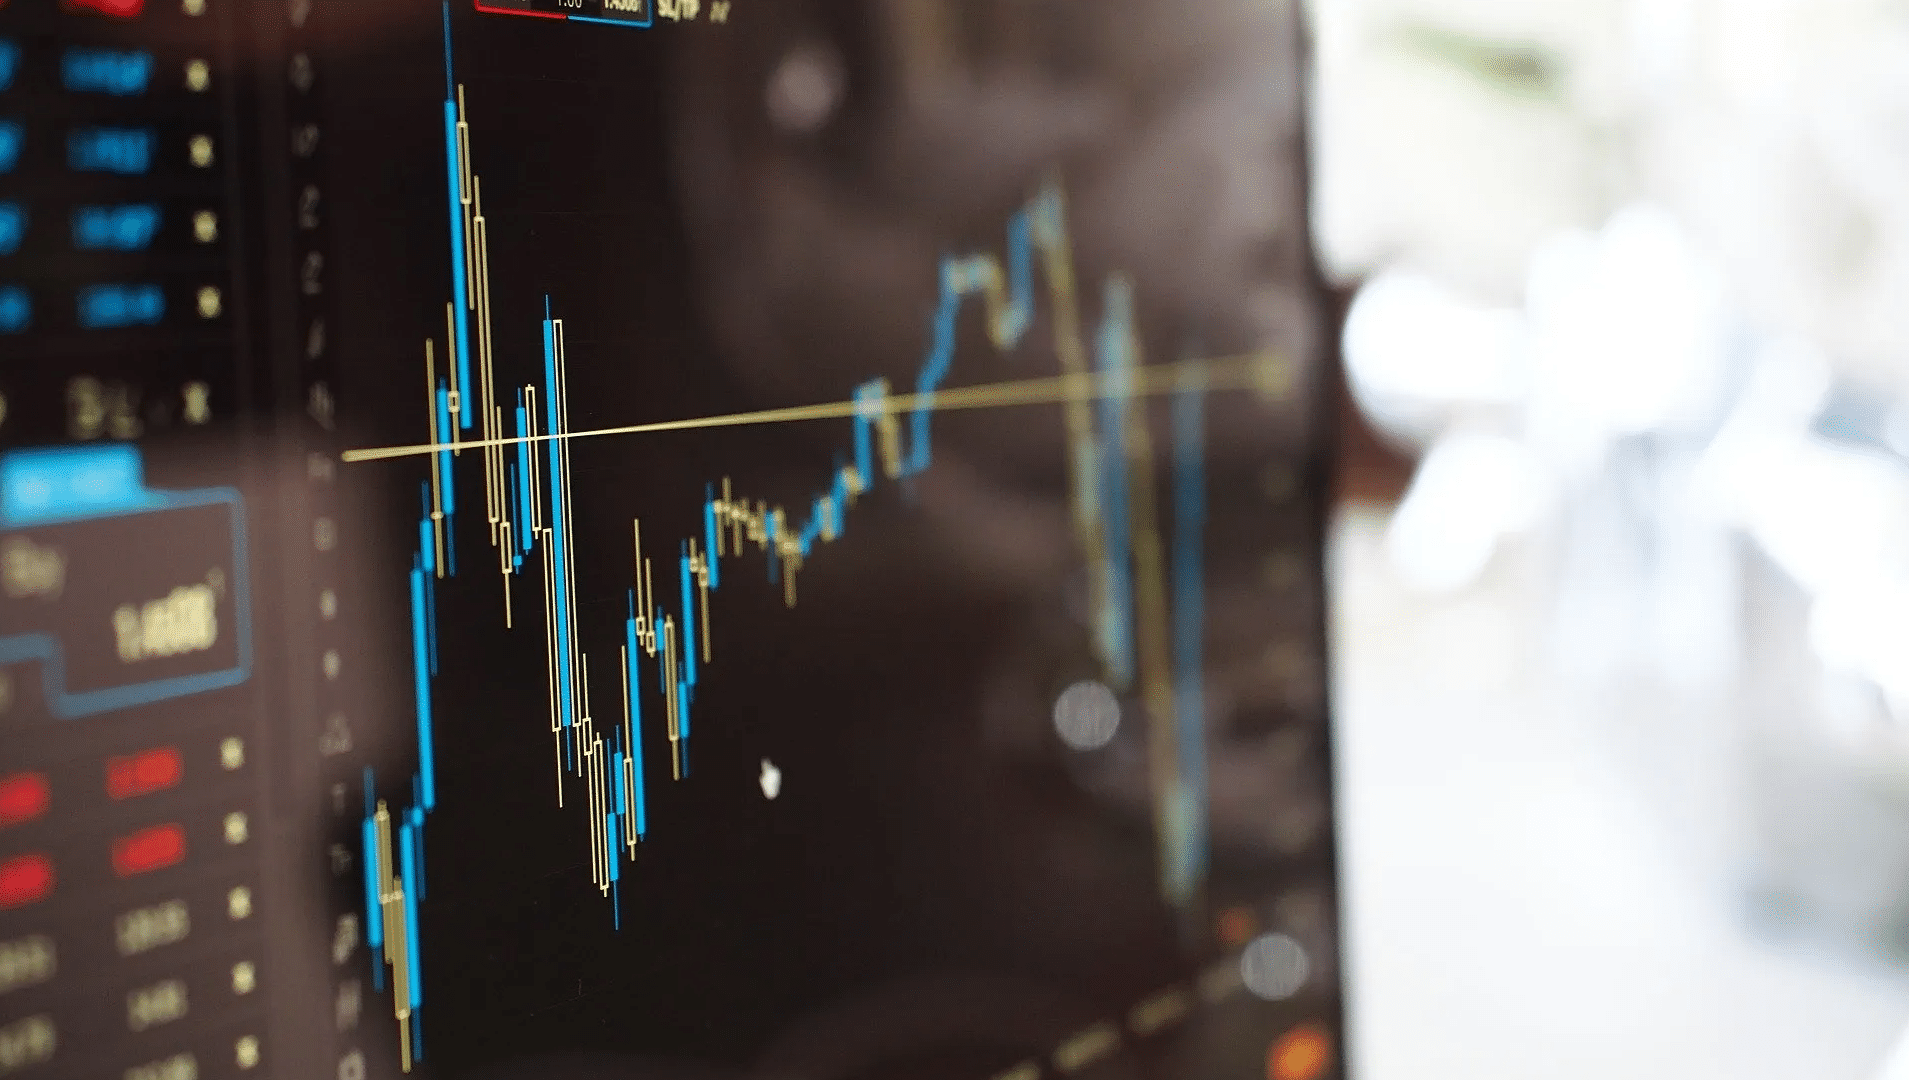 SBI, Tata Motors, Tech Mahindra and other stocks that moved most on May 13